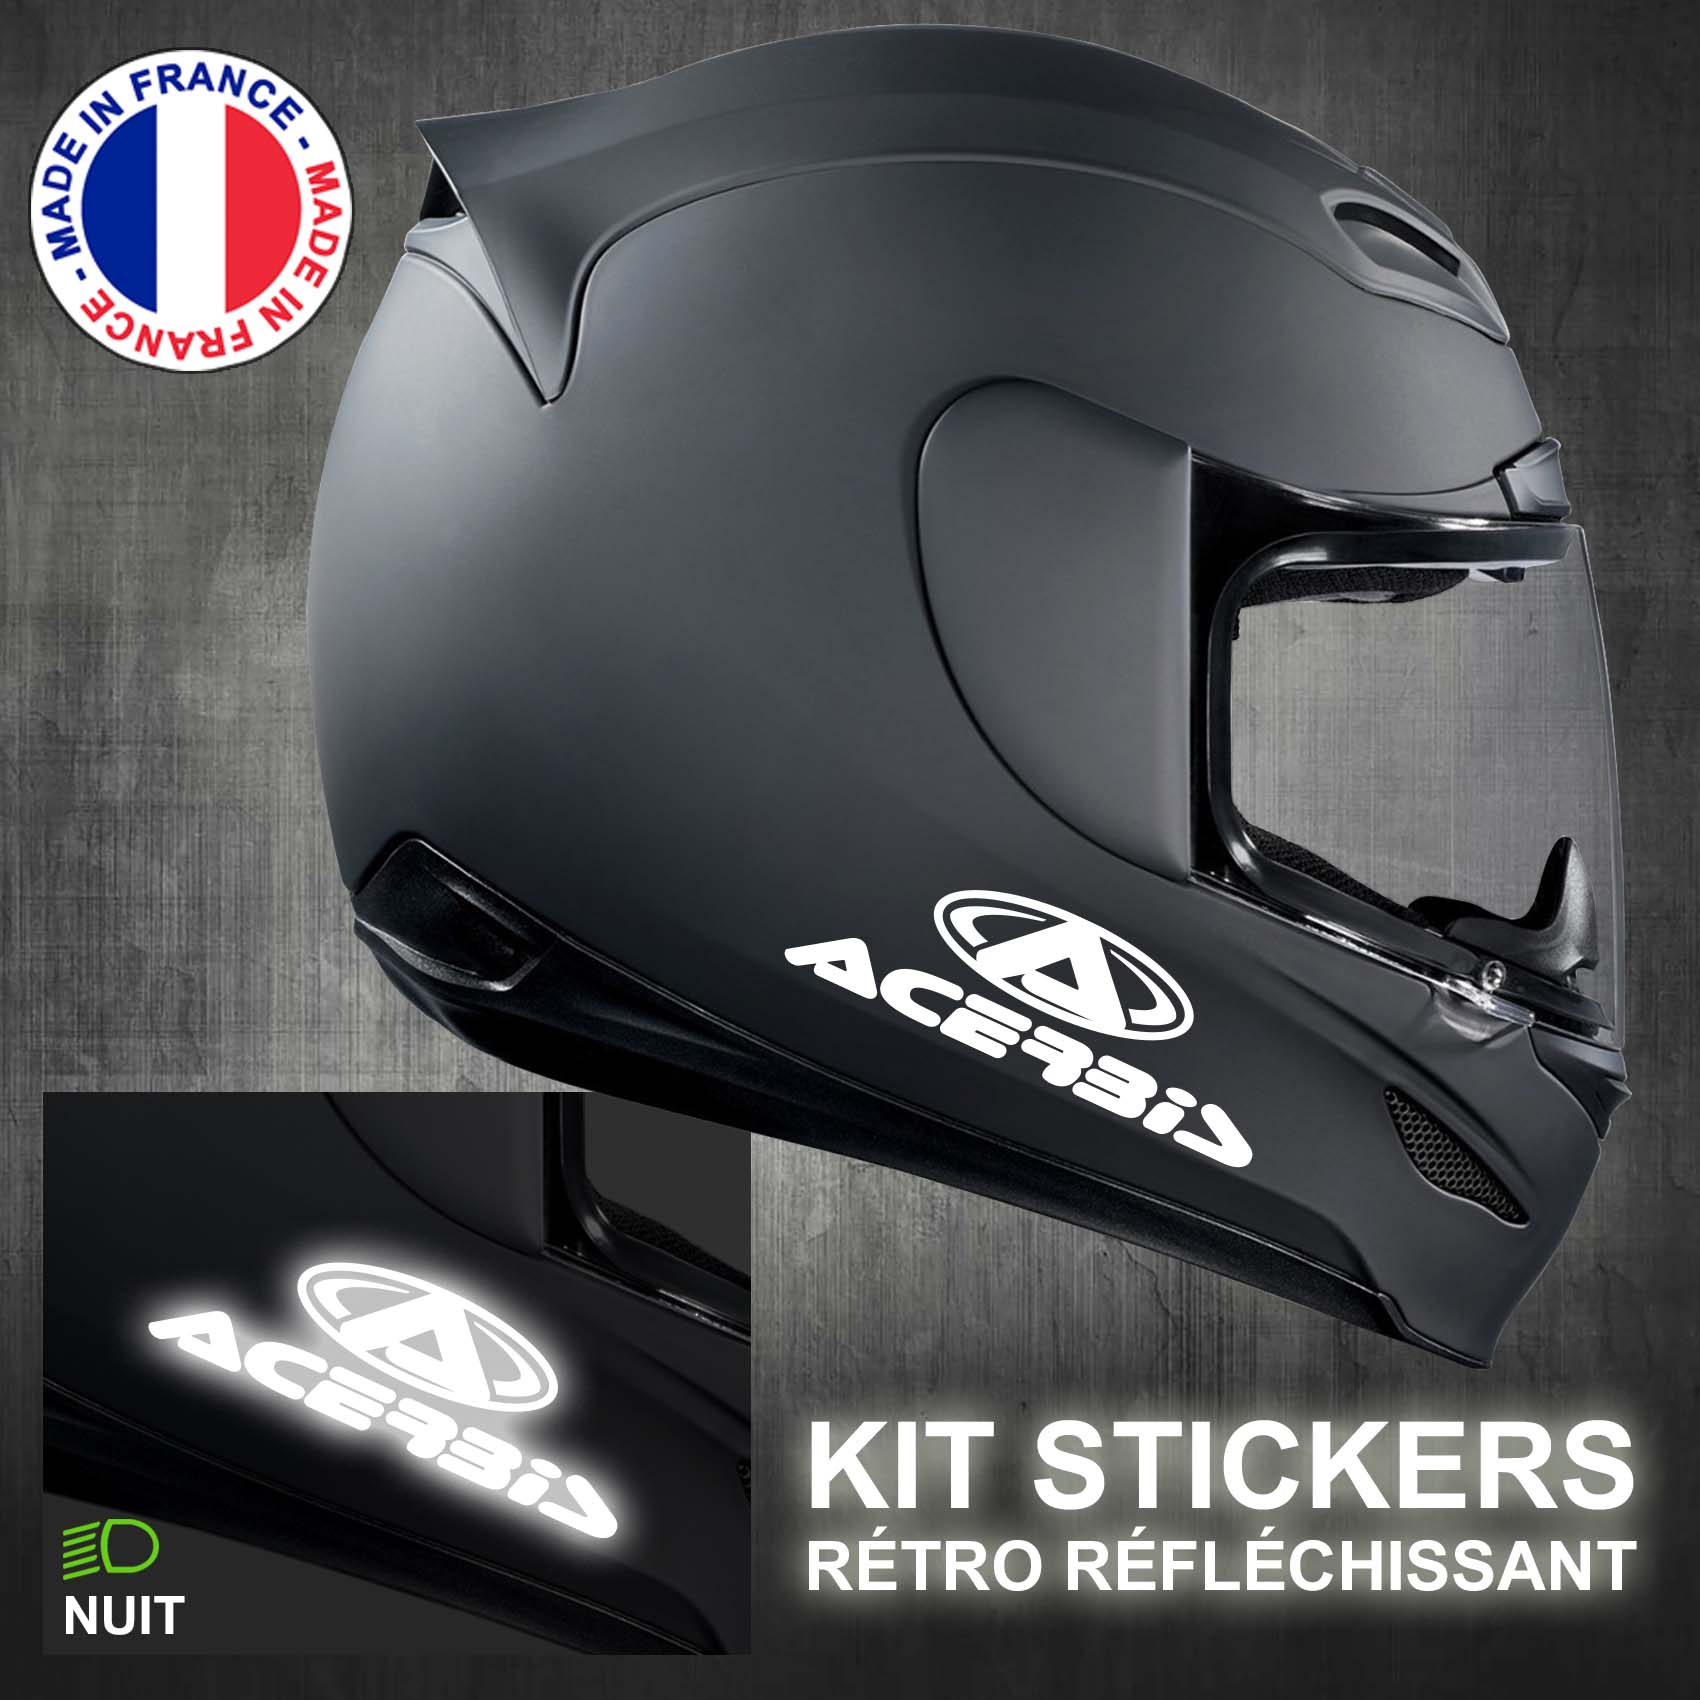 stickers-casque-moto-acerbis-ref1-retro-reflechissant-autocollant-noir-moto-velo-tuning-racing-route-sticker-casques-adhesif-scooter-nuit-securite-decals-personnalise-personnalisable-min